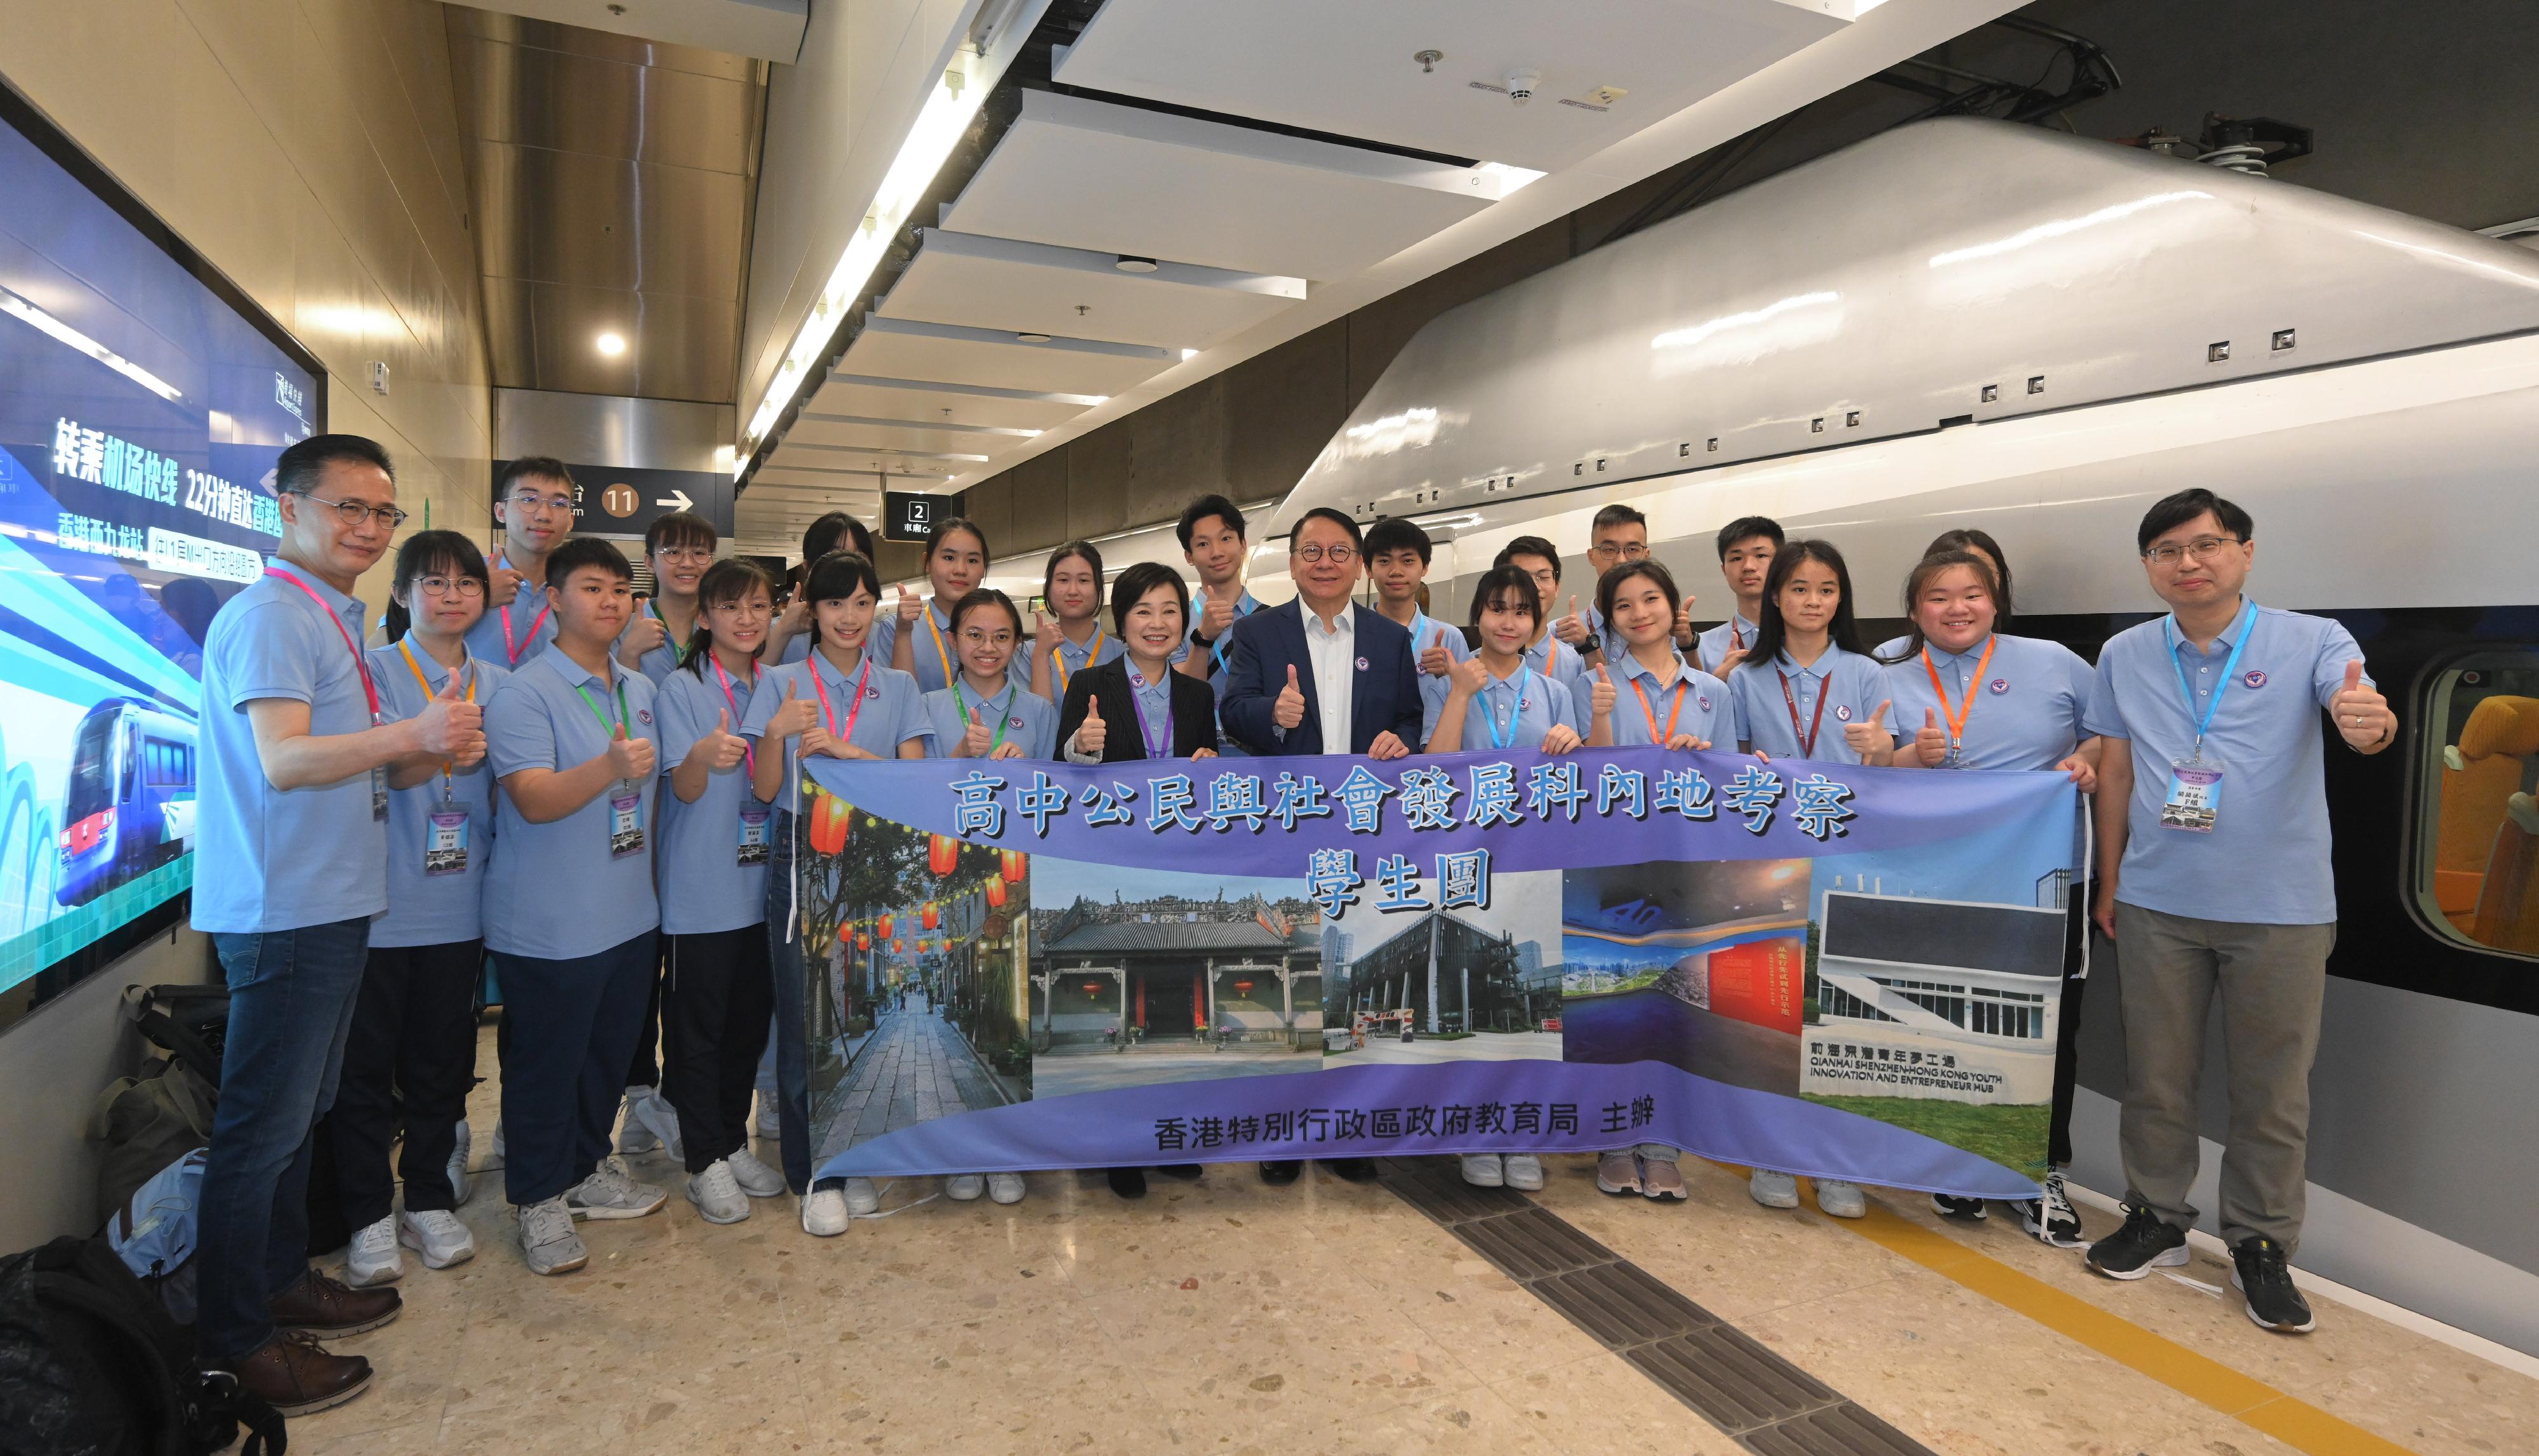 The delegation of the first Mainland study tour for students of the senior secondary subject of Citizenship and Social Development set off this morning (April 3) by the Guangzhou-Shenzhen-Hong Kong Express Rail Link (XRL) for a two-day trip to Guangzhou and Shenzhen. Photo shows the Chief Secretary for Administration, Mr Chan Kwok-ki (front row, sixth right), seeing off the Secretary for Education, Dr Choi Yuk-lin (front row, seventh right), who leads the delegation, as well as the participating students and teachers at the Hong Kong West Kowloon Station of the XRL.